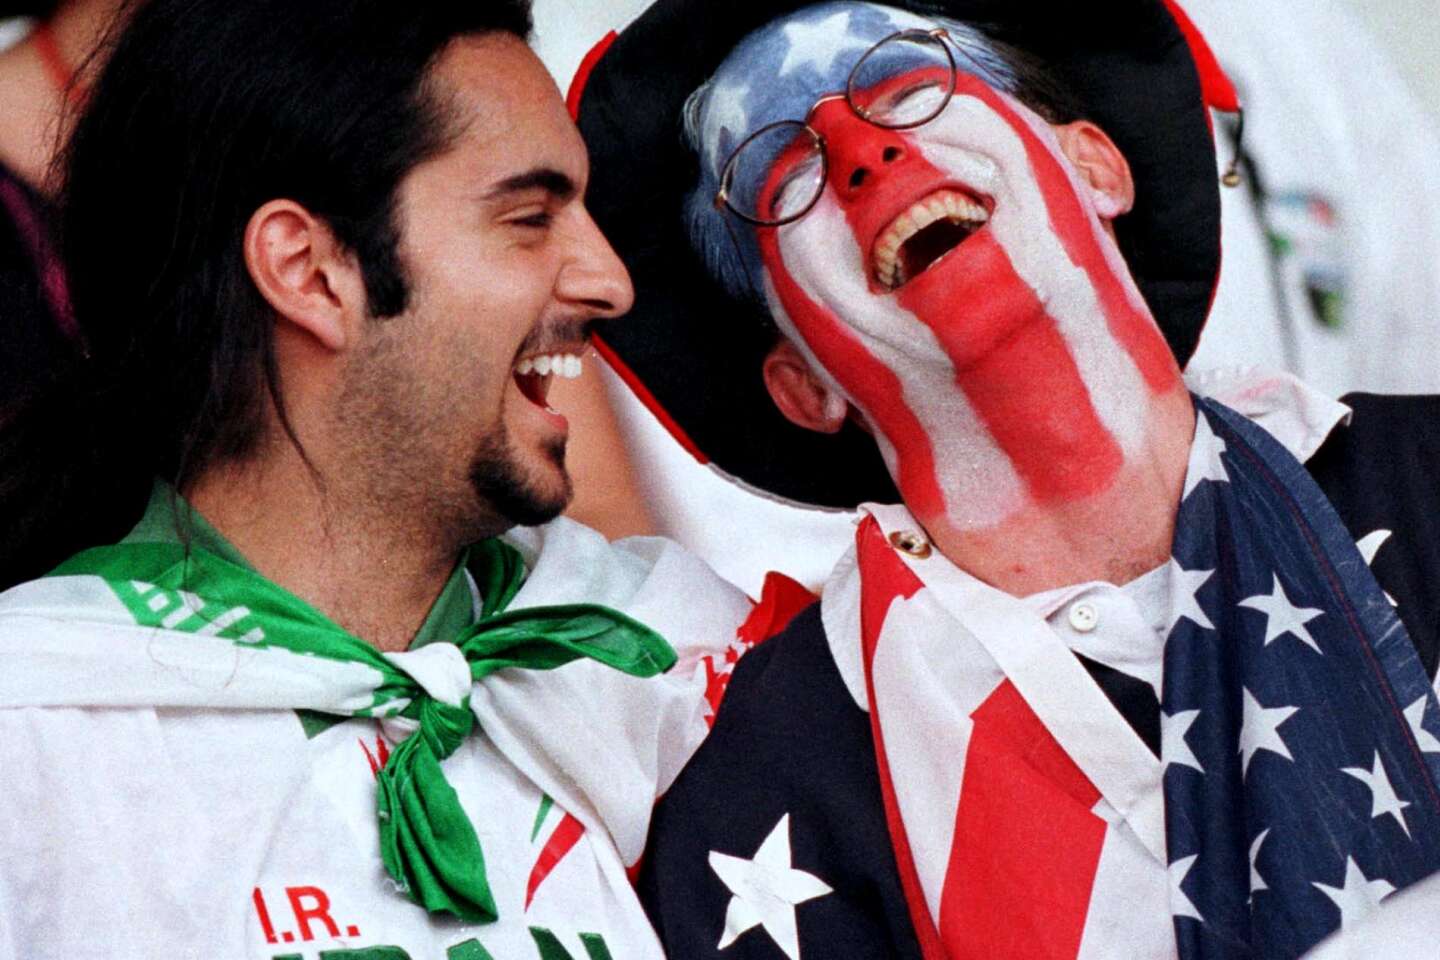 Iran and the United States, the illusion of soccer diplomacy